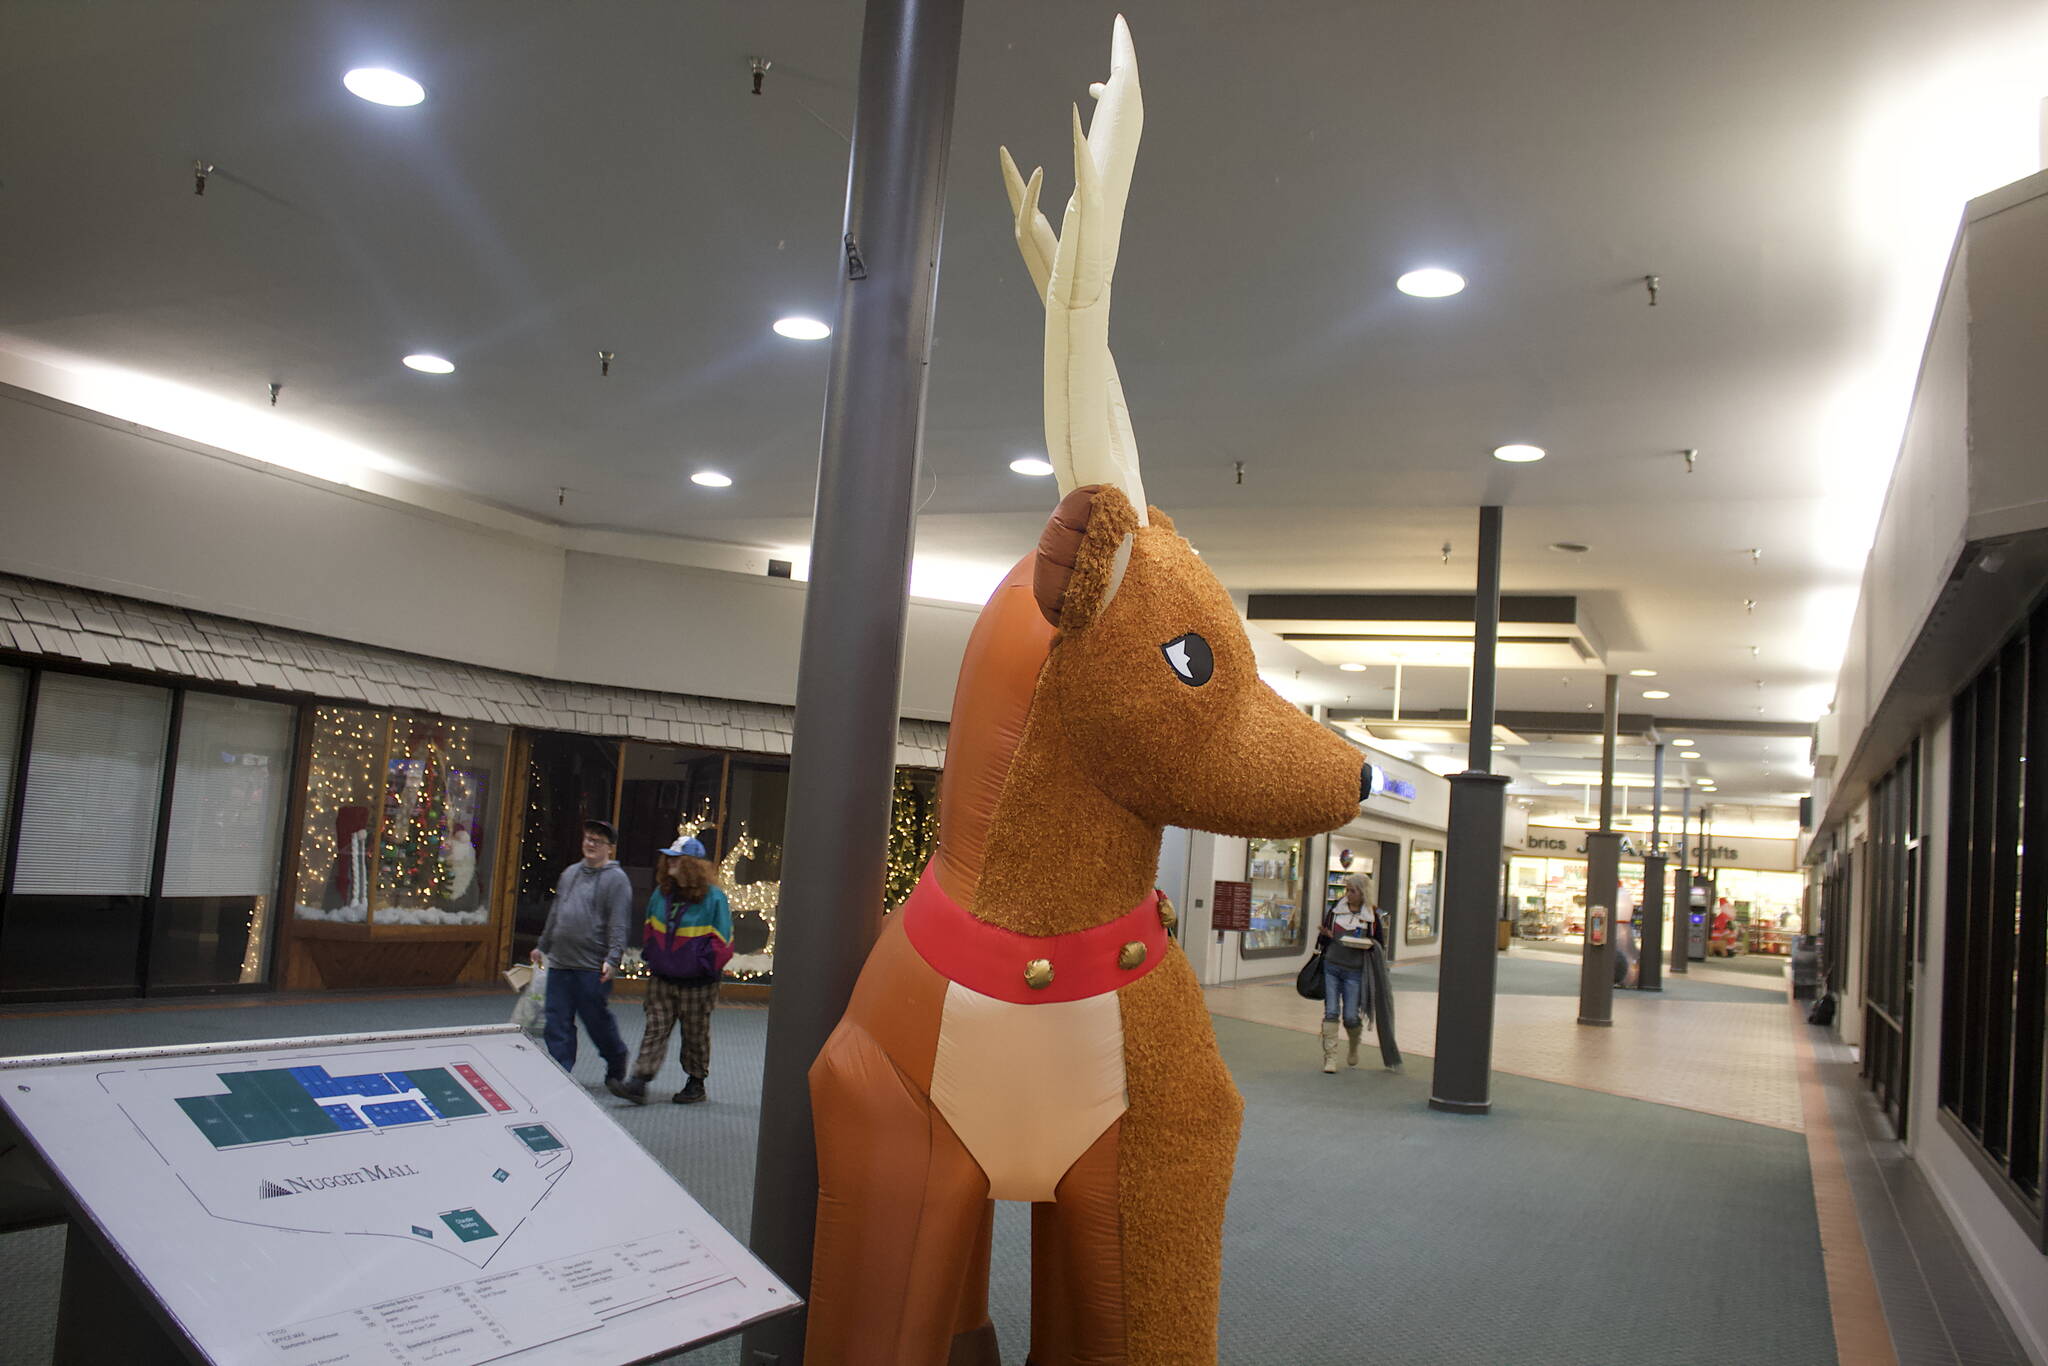 A larger-than-life reindeer awaits holiday shoppers near an entrance at Nugget Mall on Wednesday, where there were no obvious “Black Friday” signs or banners on display, but merchants are nonetheless readying sales prices in the hopes of luring an increased flow of traffic. (Mark Sabbatini / Juneau Empire)